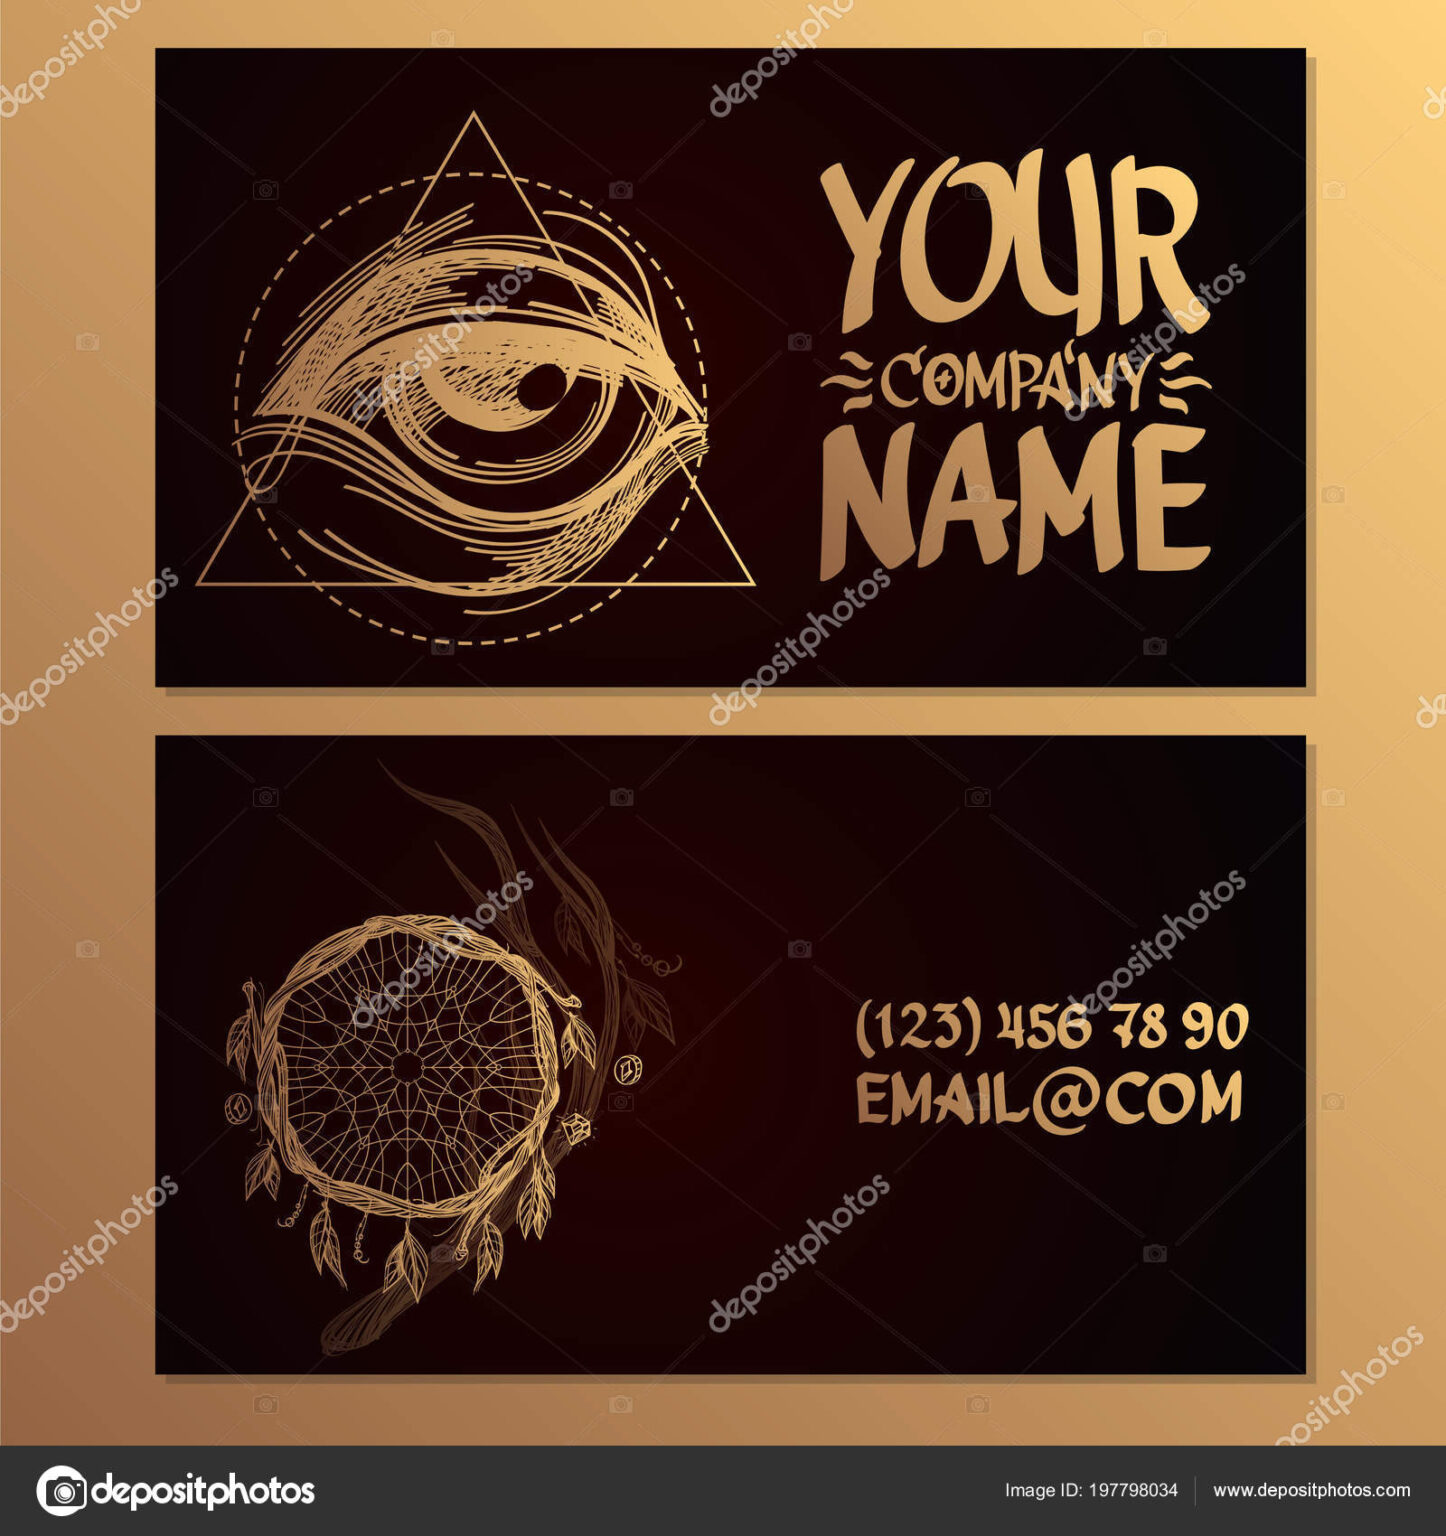 Cards Image Eye Catcher Dreams Templates Creating Business ...